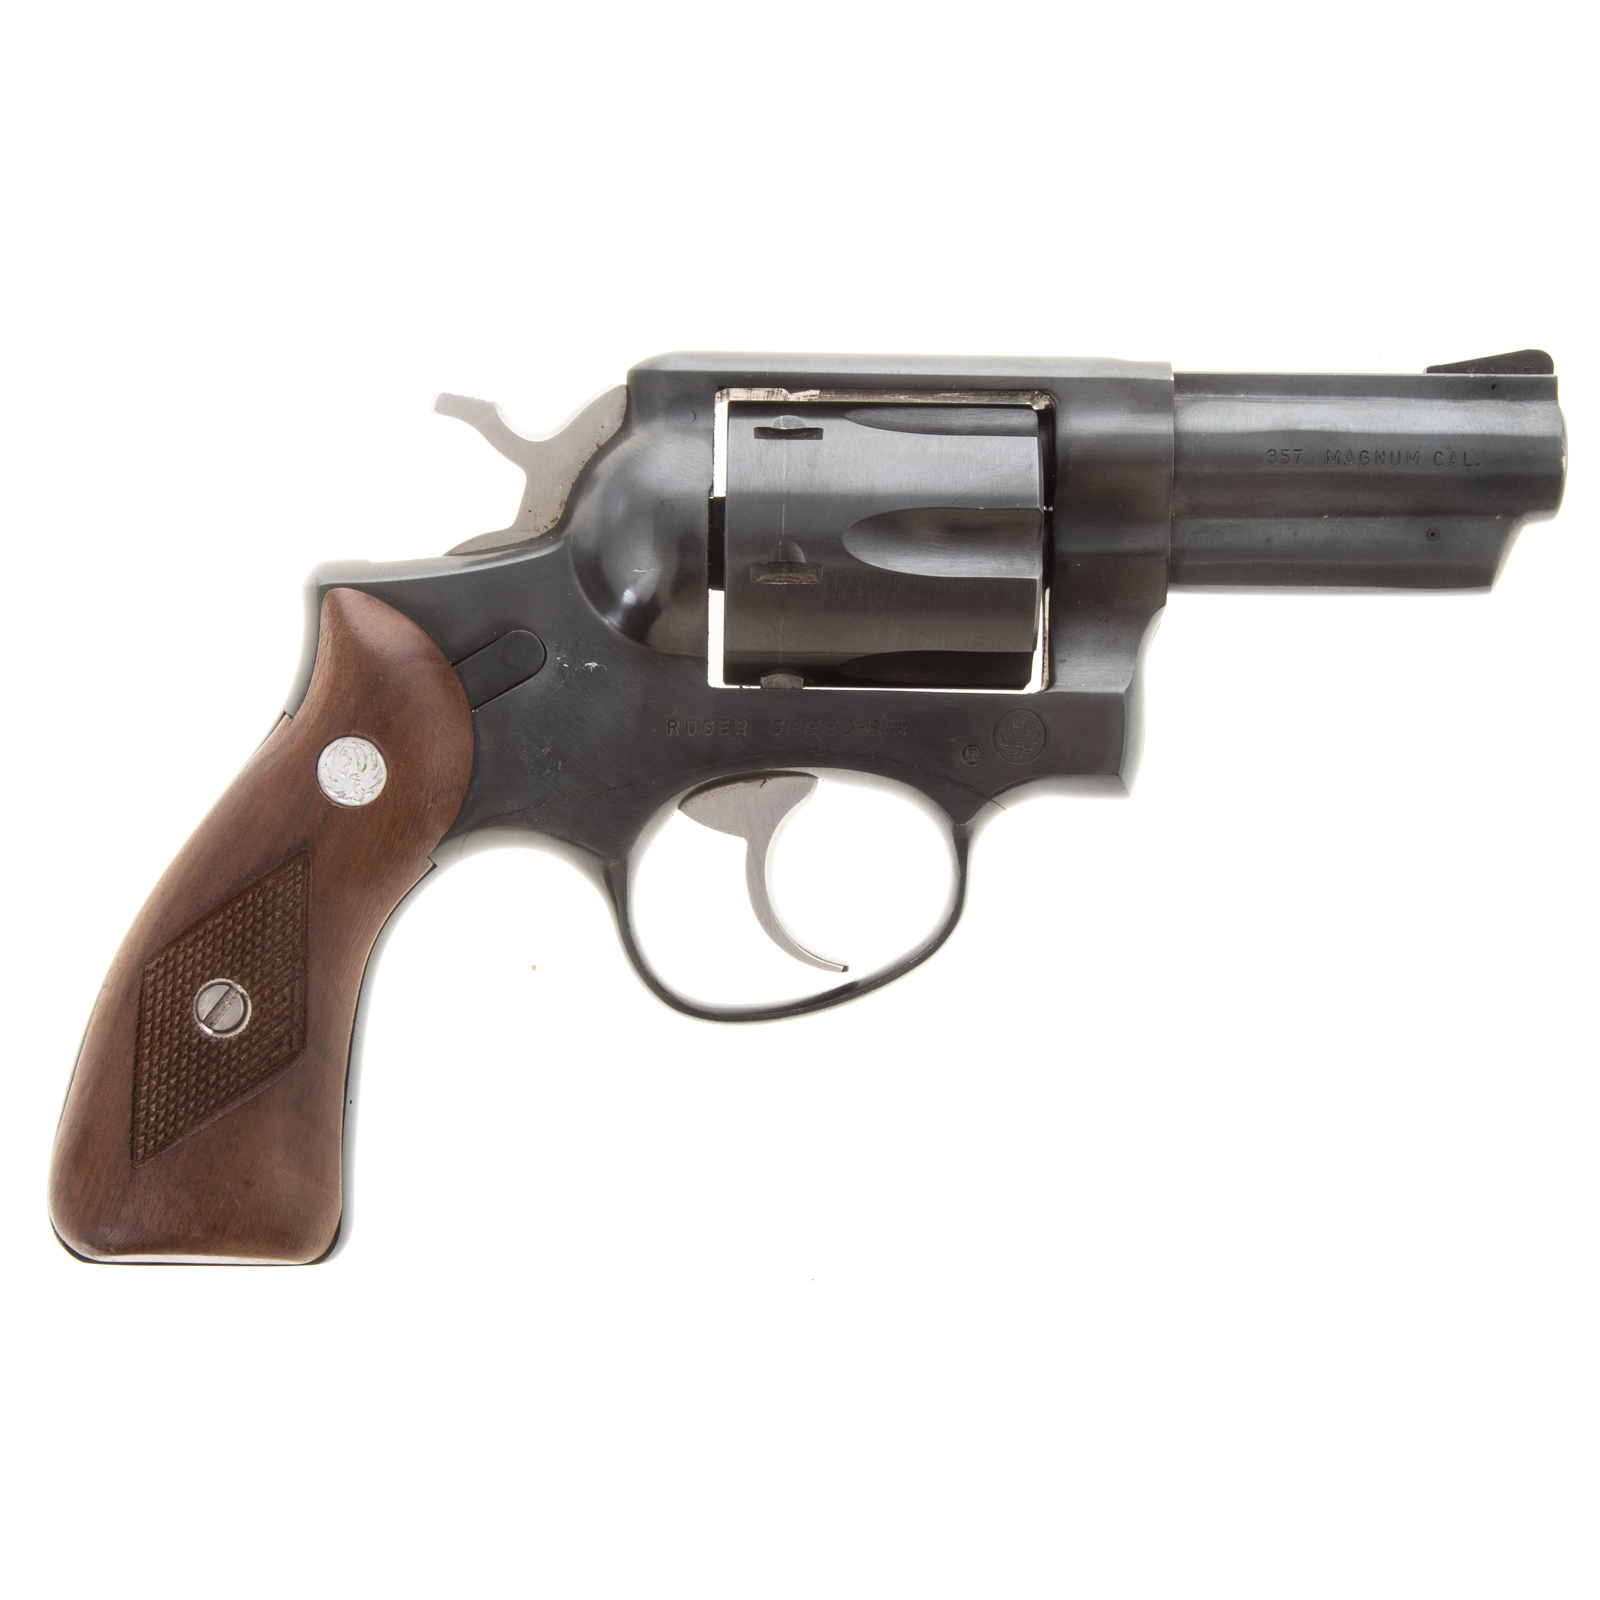 RUGER SPEED-SIX DOUBLE ACTION REVOLVER